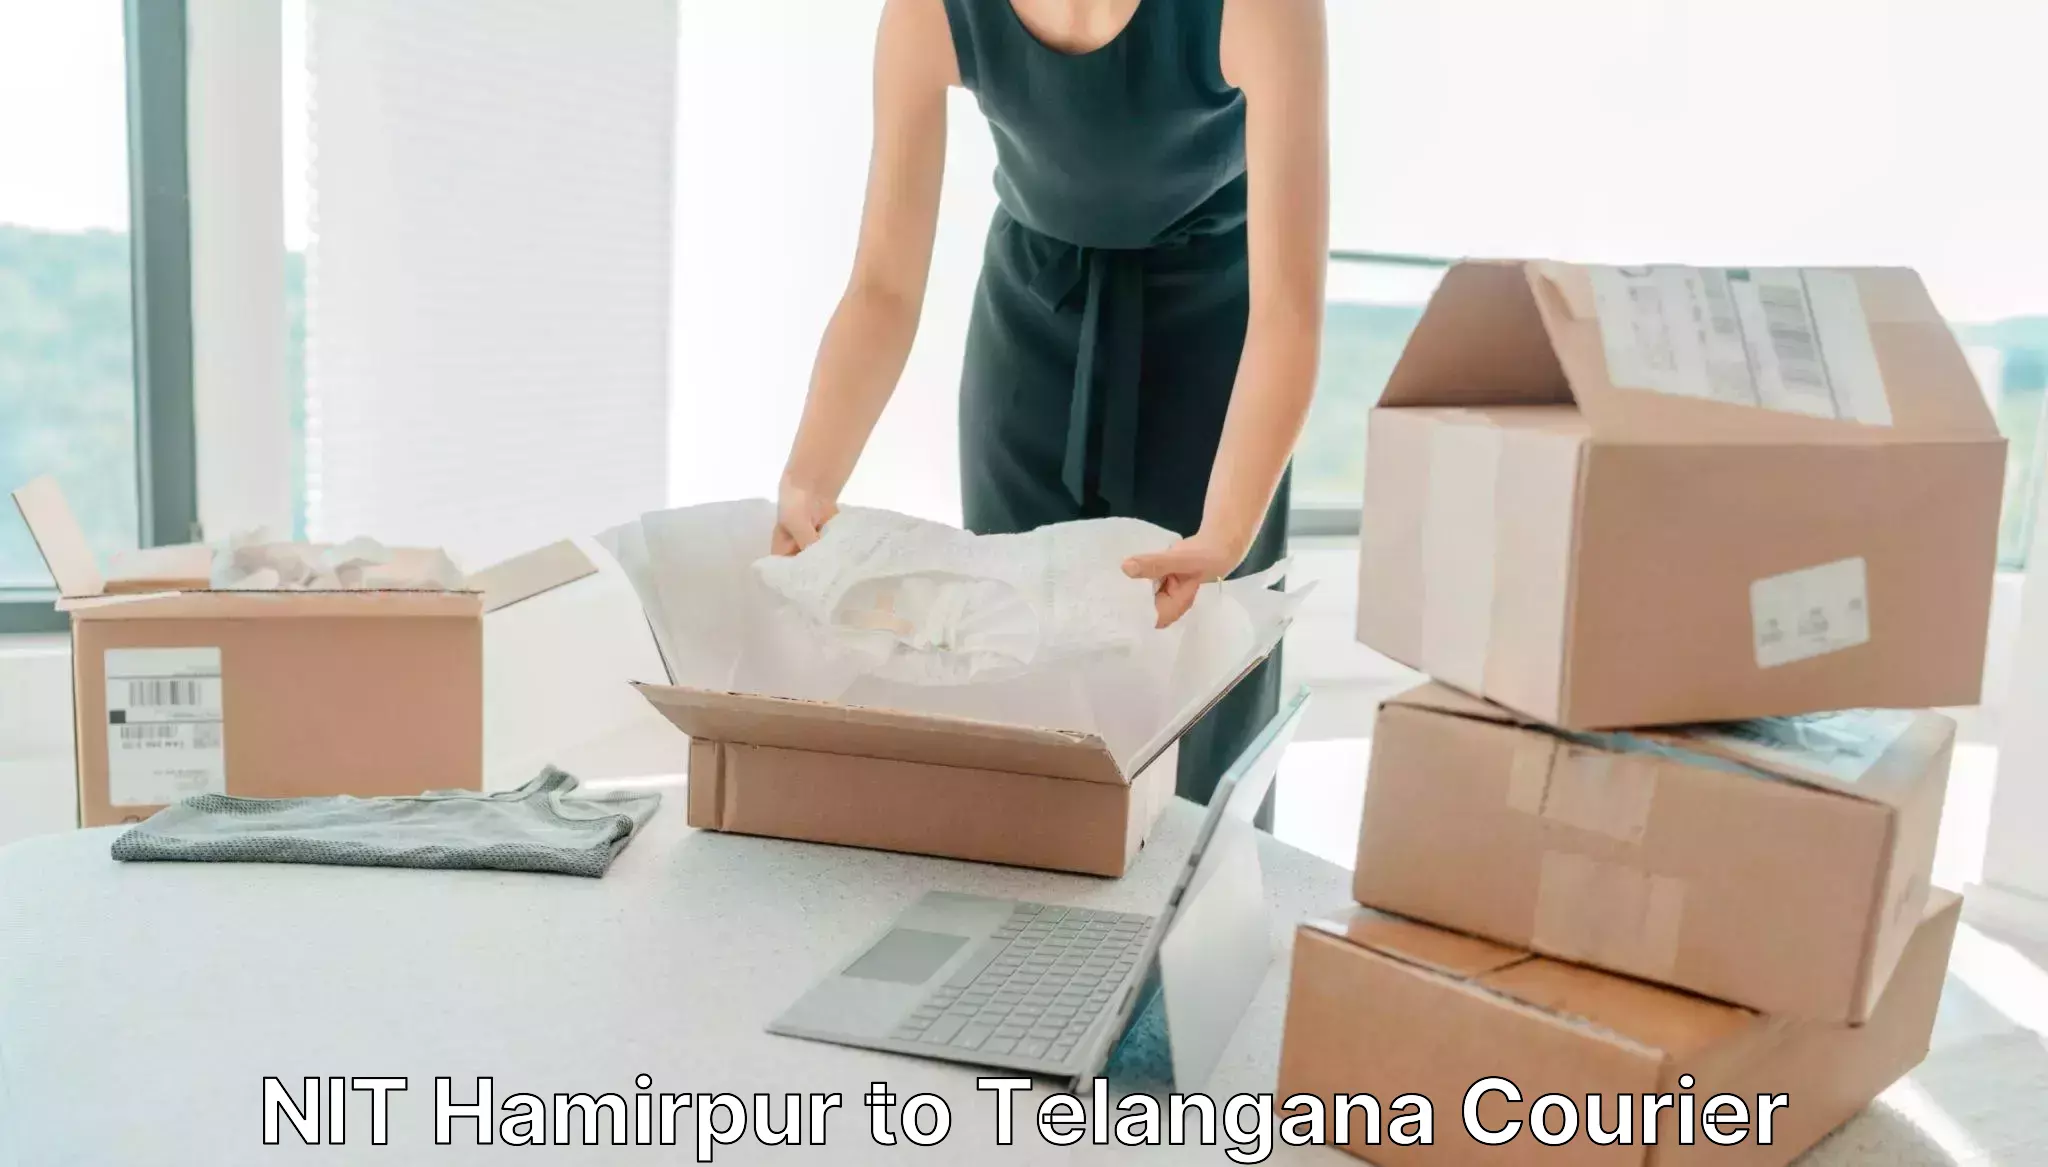 Residential courier service NIT Hamirpur to Ramannapeta